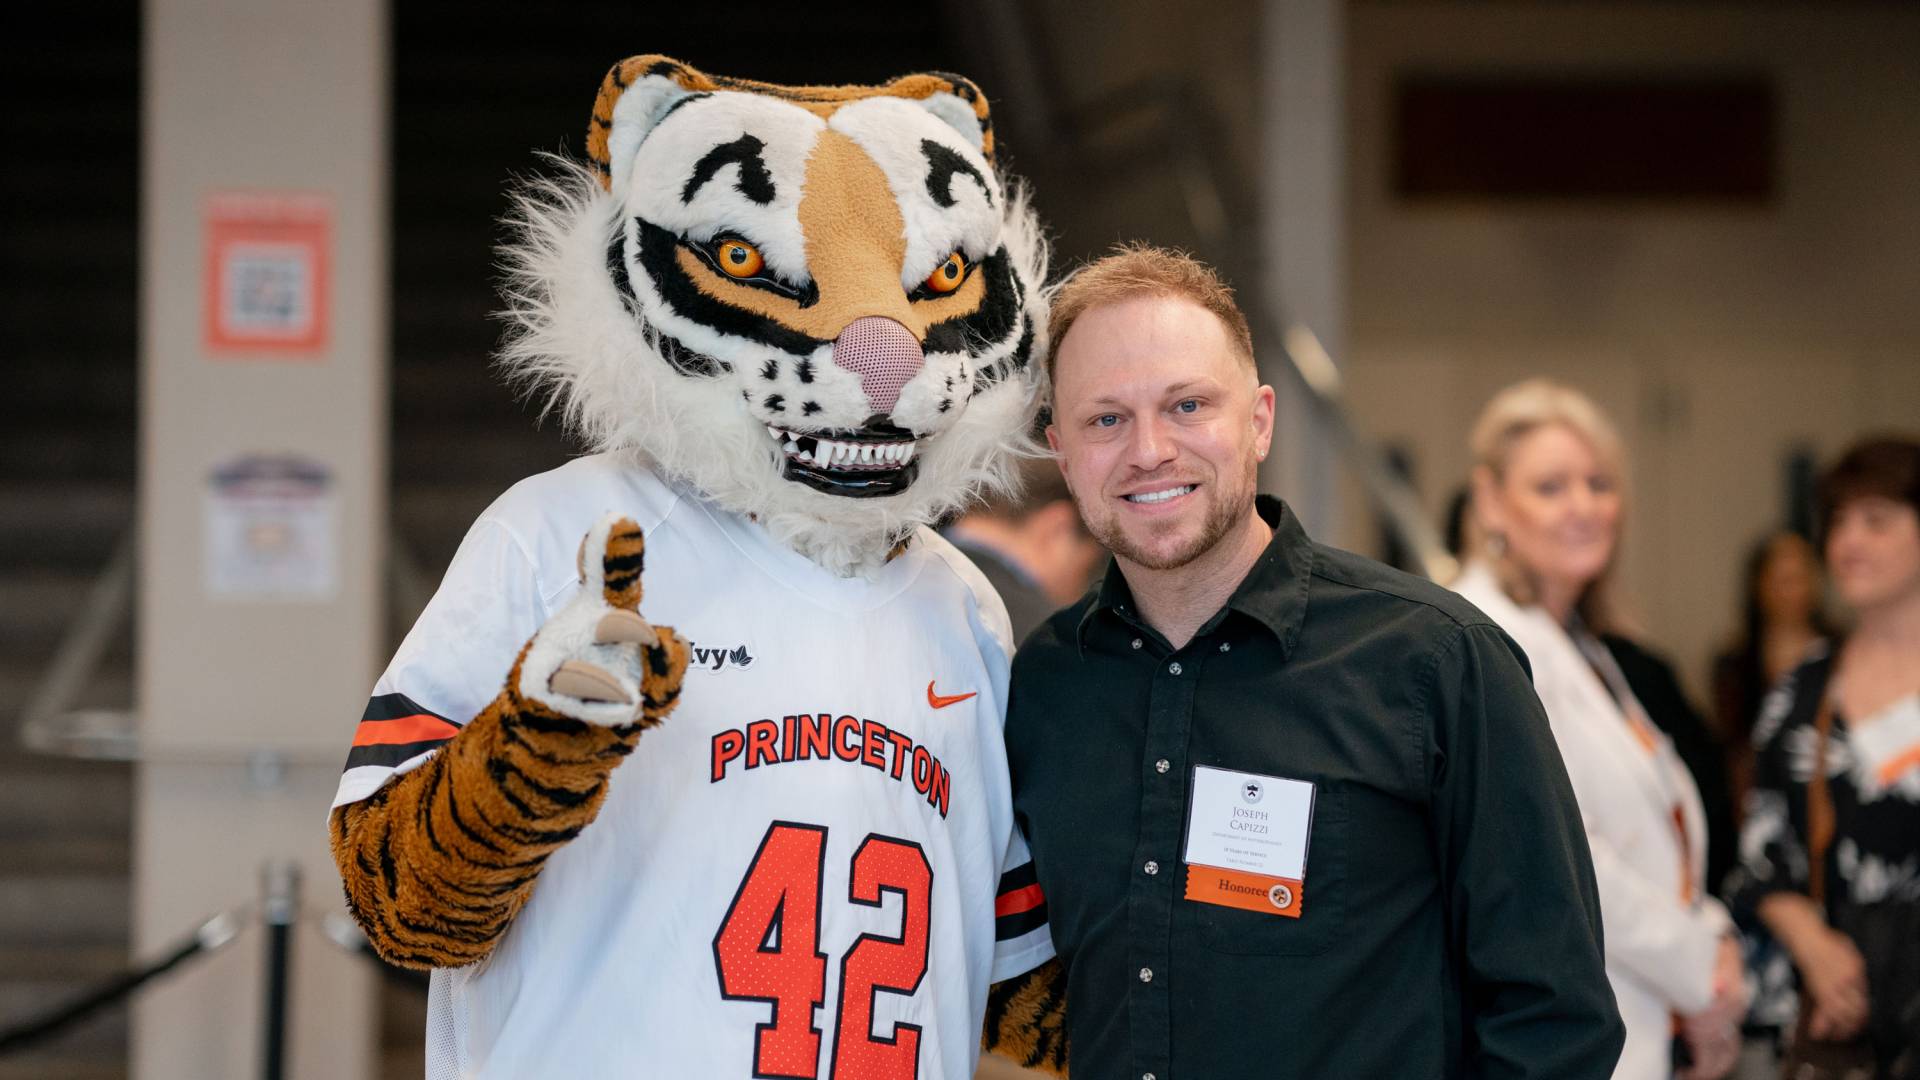 Tiger poses with a Princeton employee